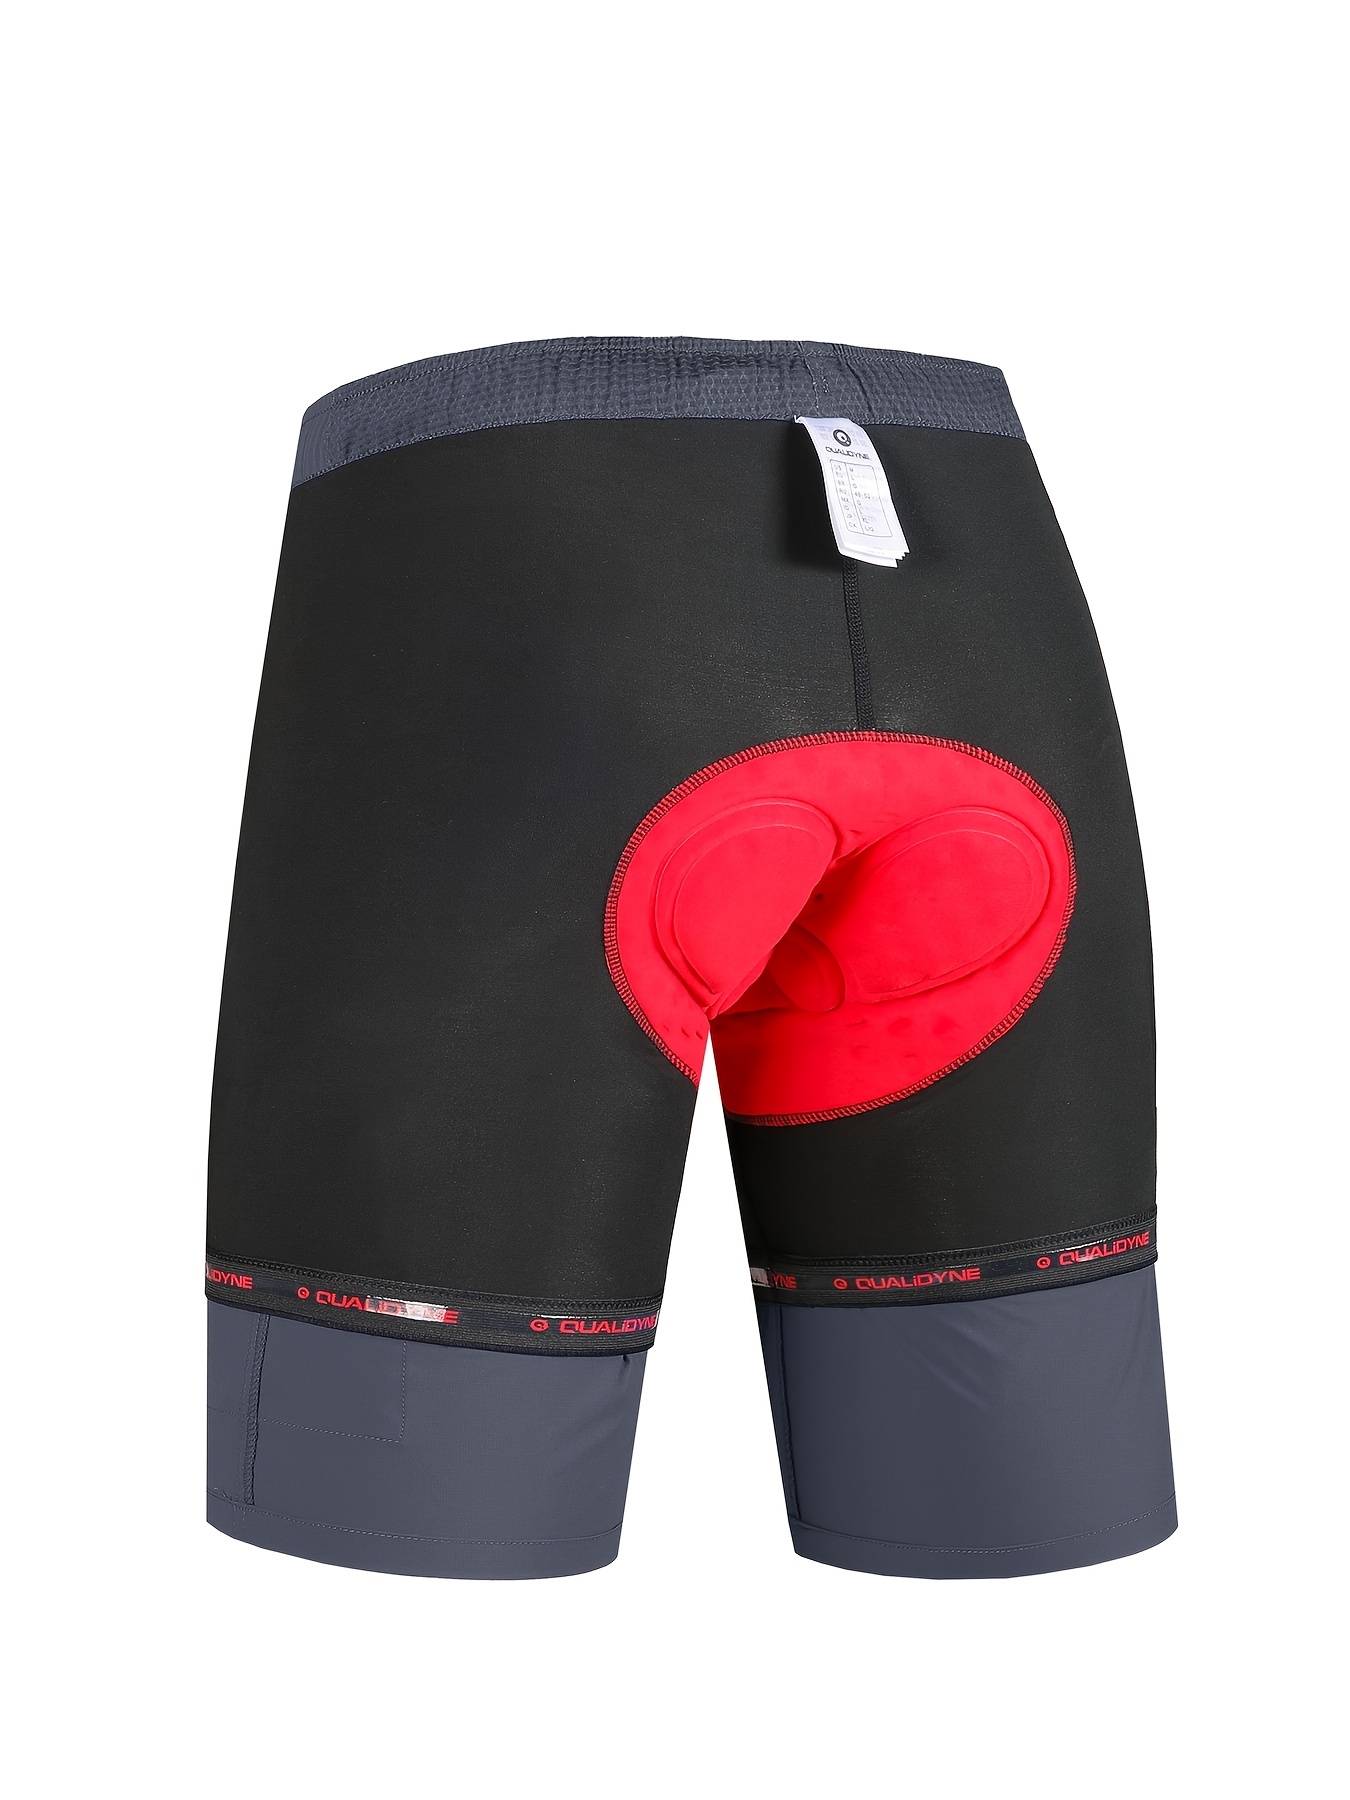 Women's 4D Padded Bike Shorts Cycling Underwear with Pockets